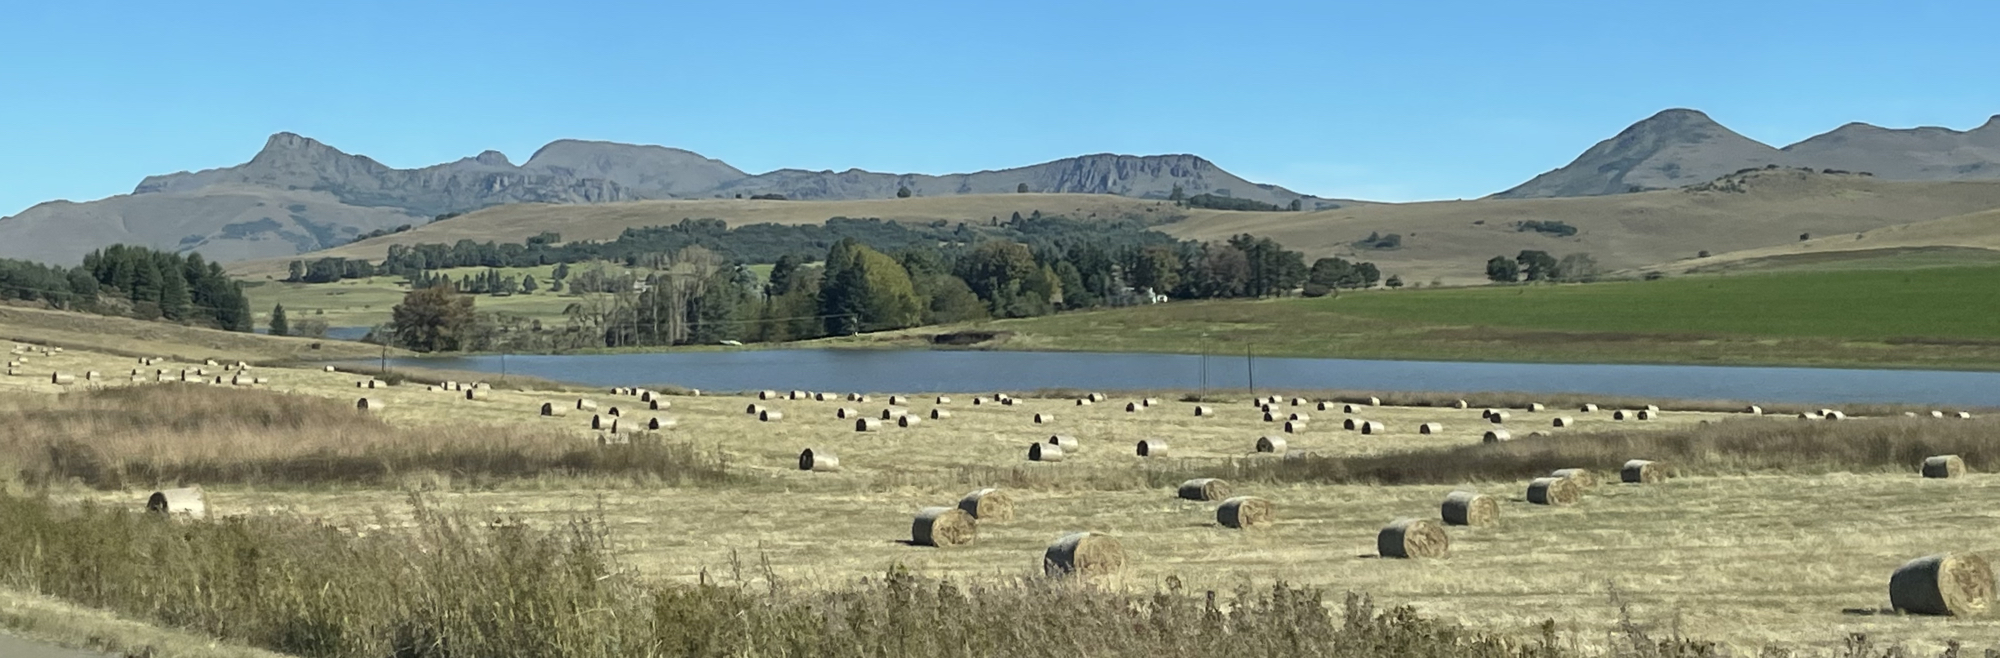 View of Mount Currie from the Underberg/Kokstad road.